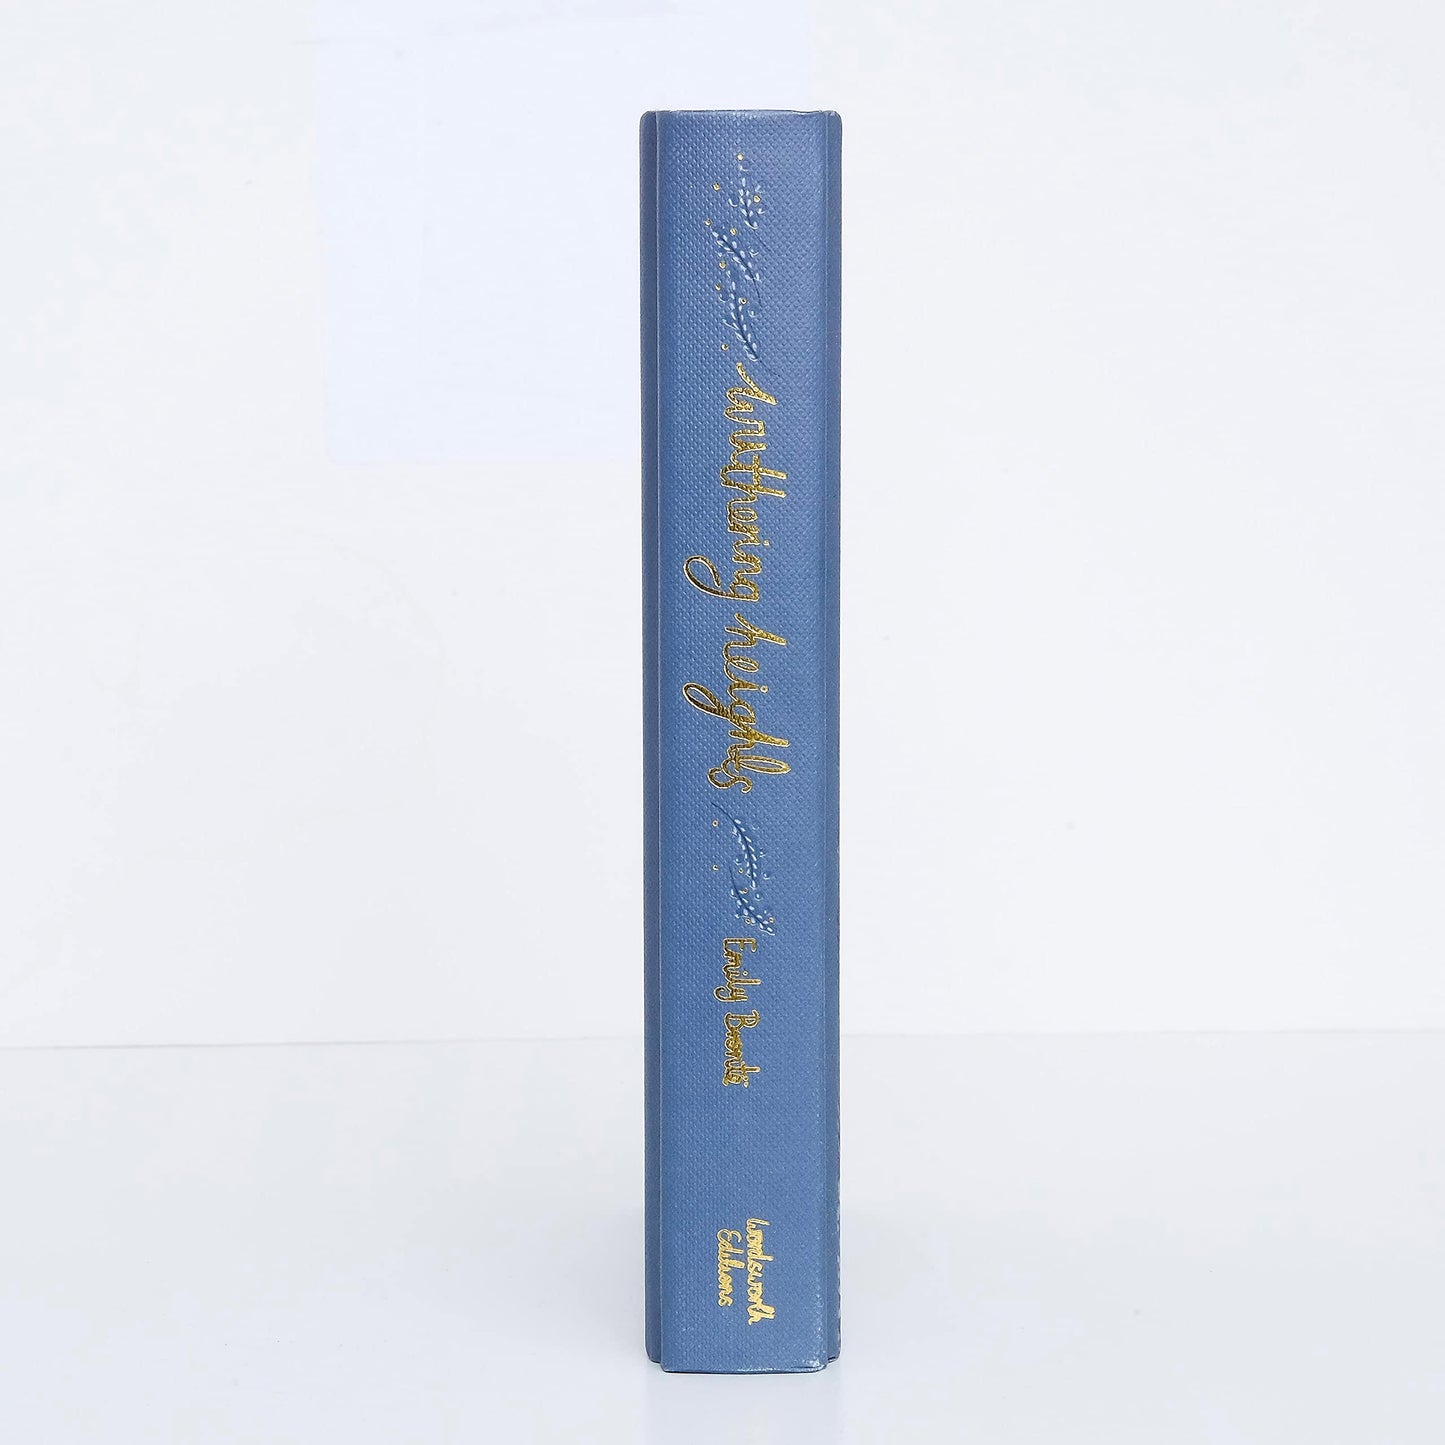 Wuthering Heights by Emily Bronte - Wordsworth Collector's Edition